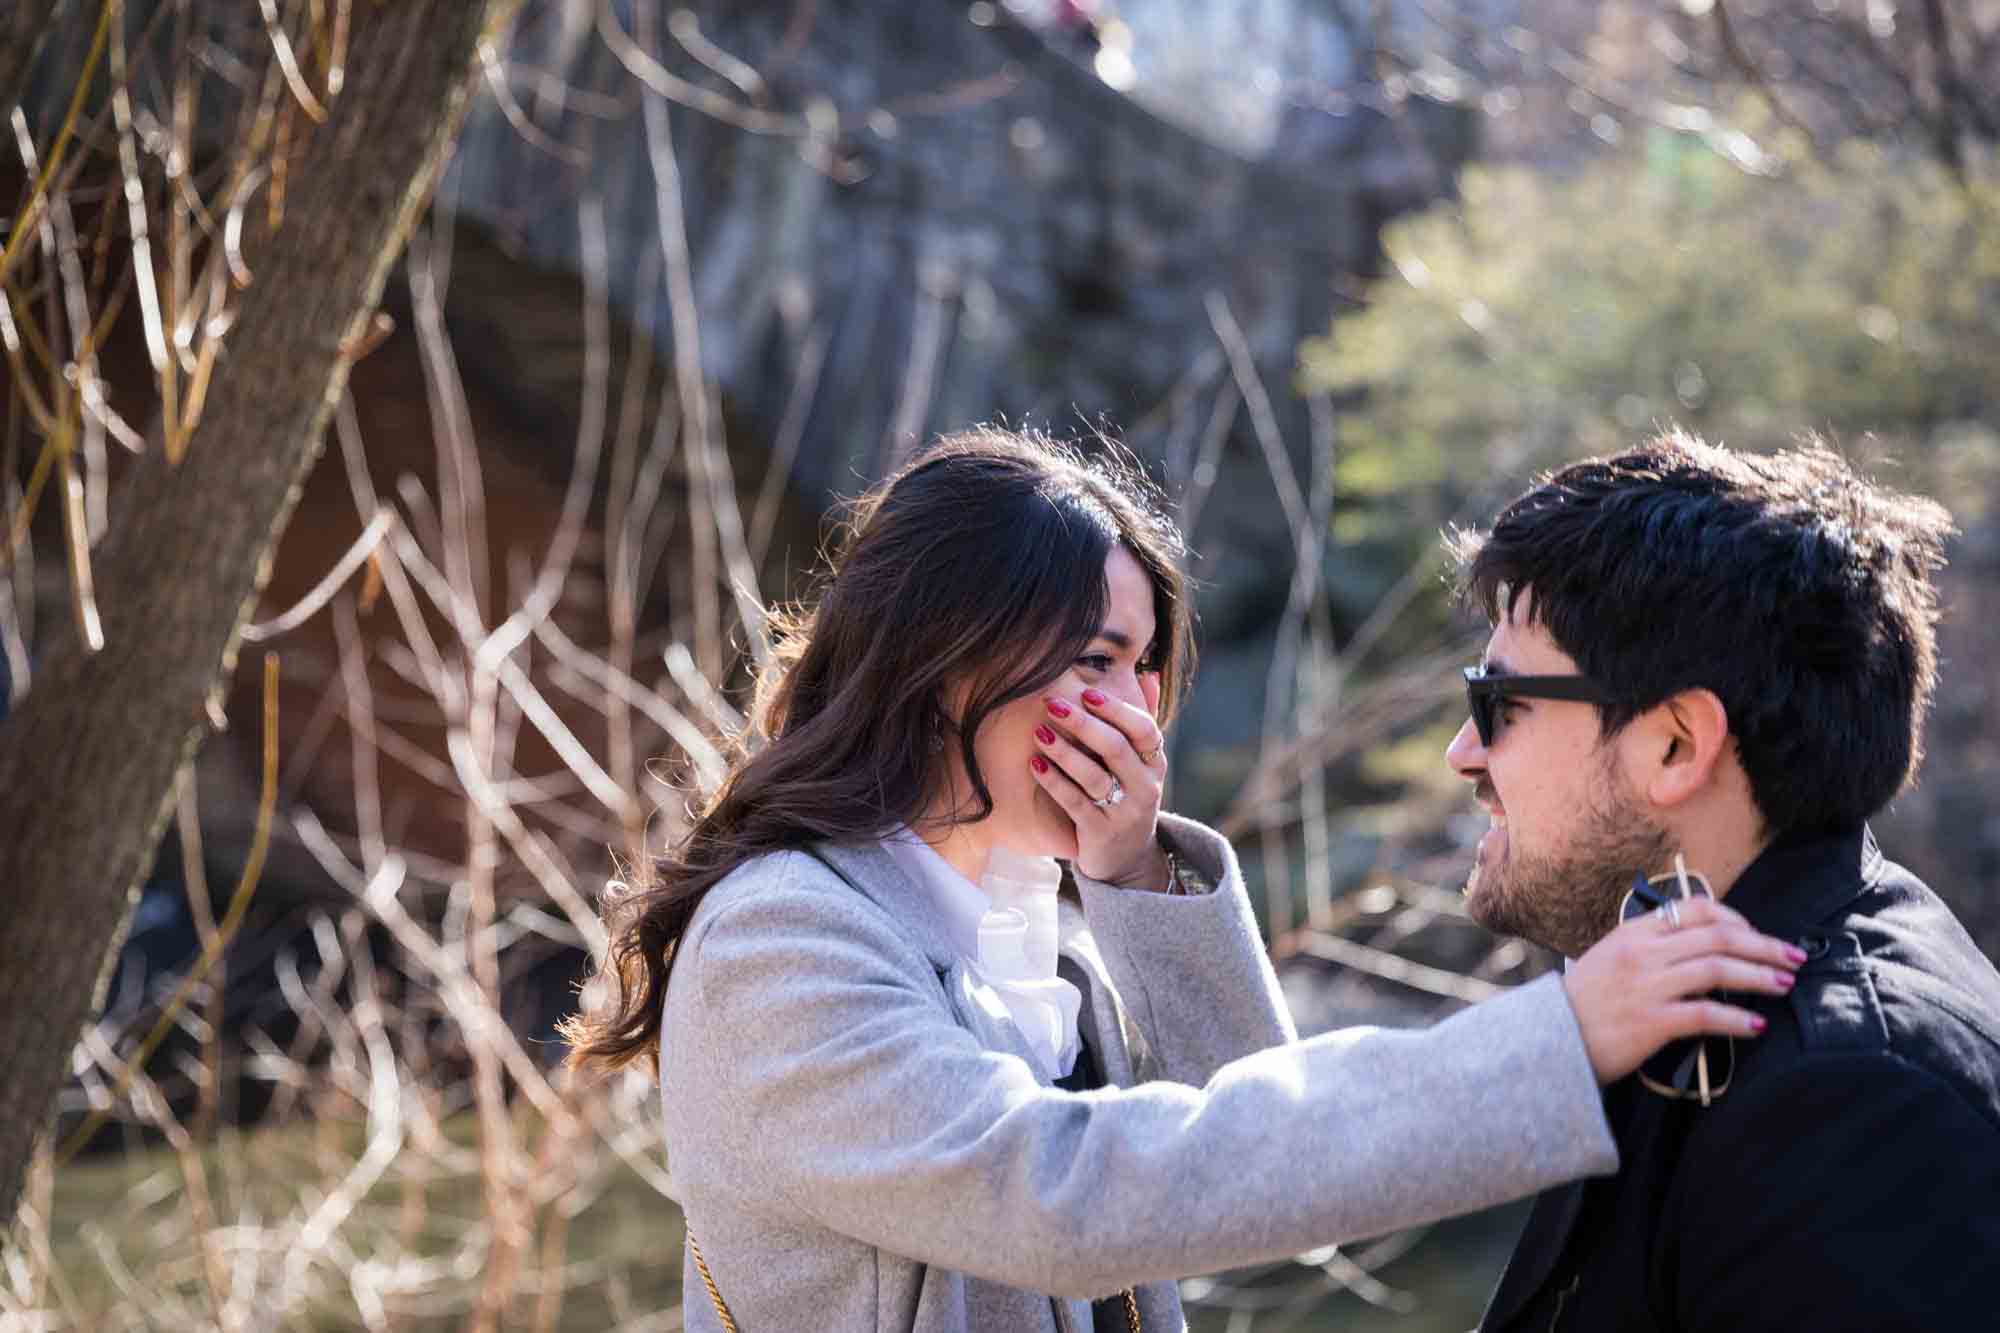 Surprised woman with hand over mouth looking at man wearing sunglasses during a Gapstow Bridge surprise proposal in Central Park